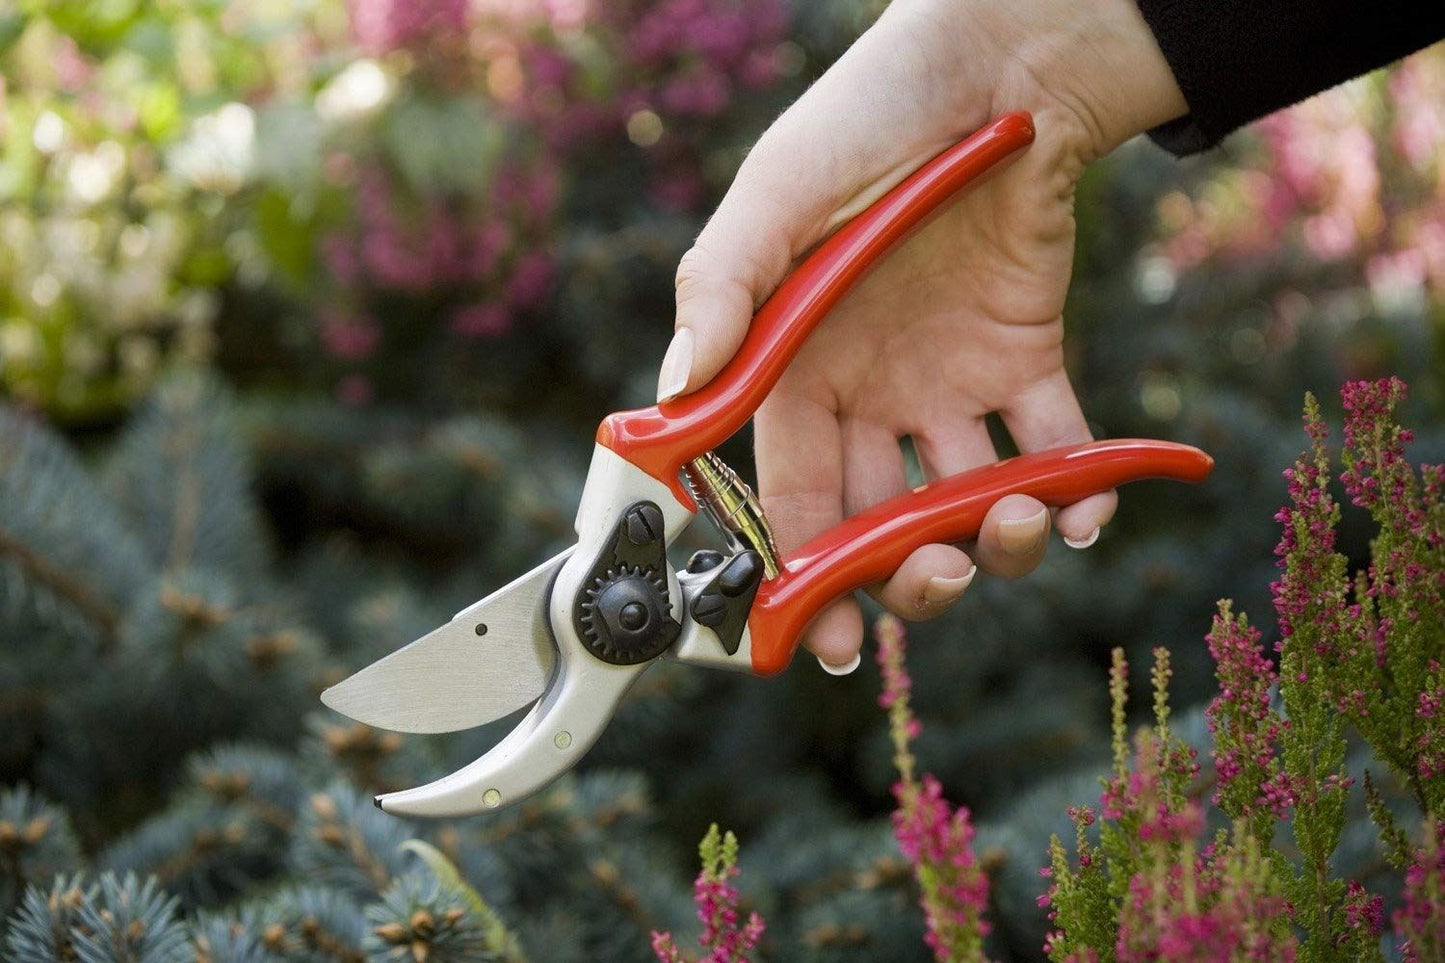 Spear and Jackson 6657BS Razorsharp Professional Pro Short Blade Heavy Duty Bypass Secateurs, Red, Small